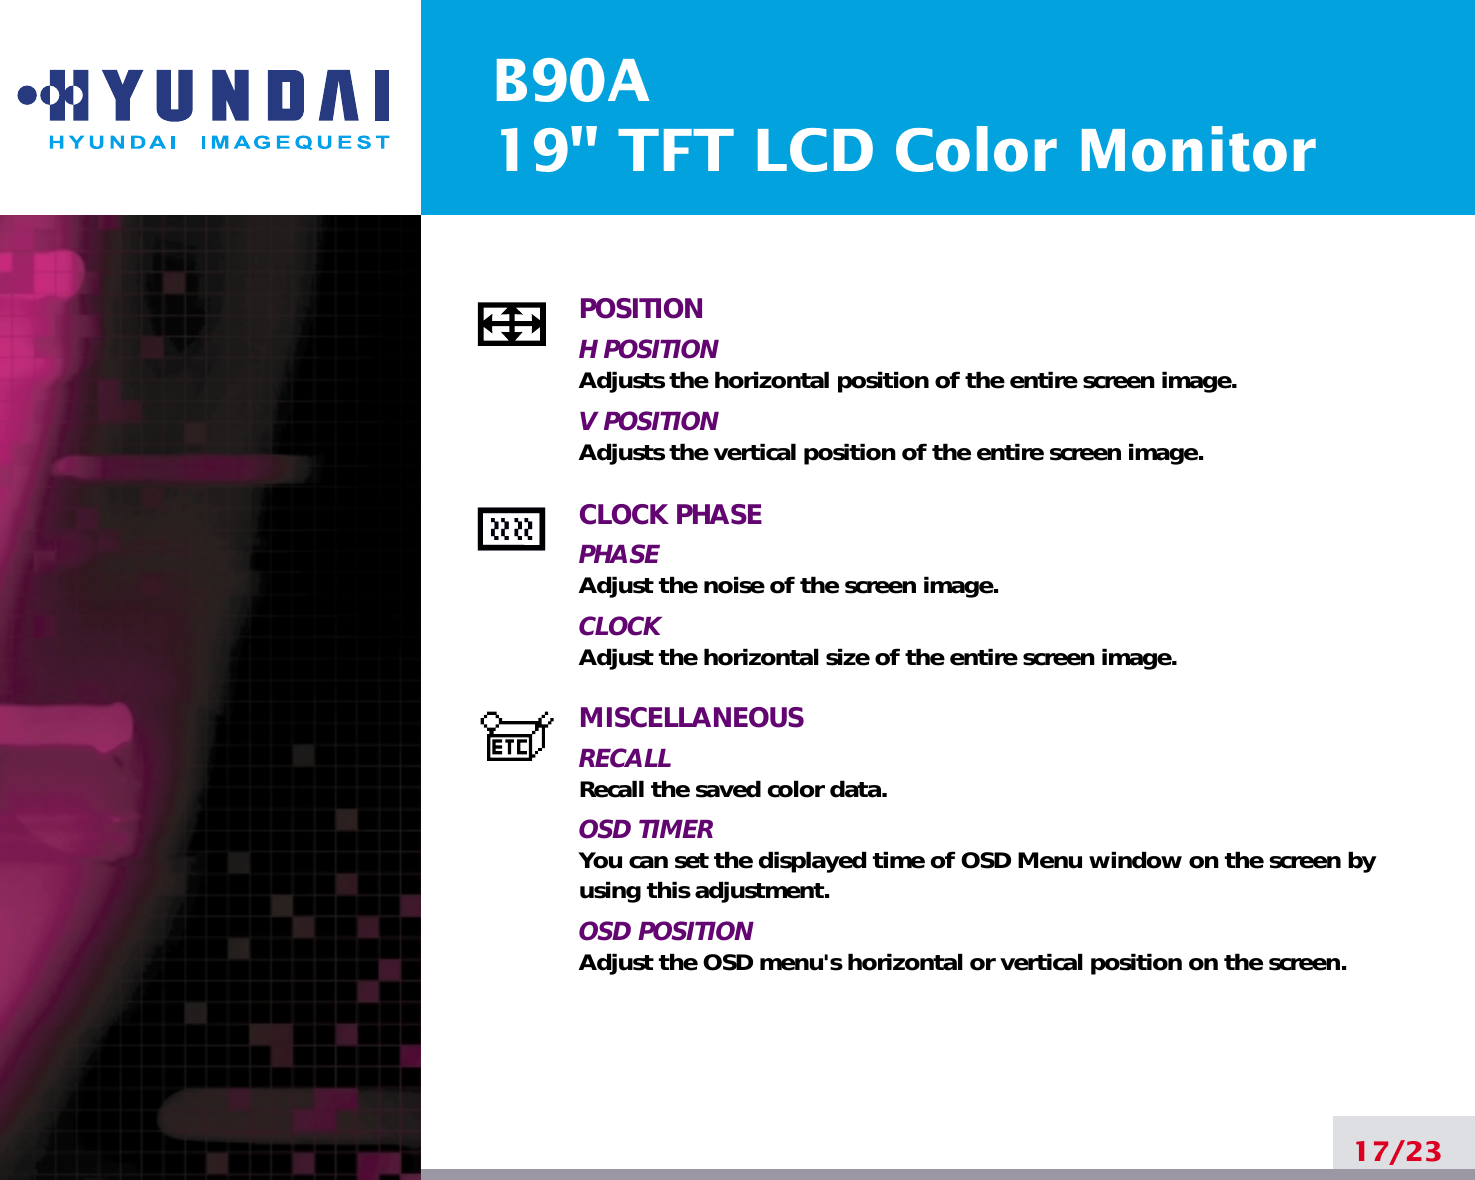 B90A19&quot; TFT LCD Color Monitor17/23POSITIONH POSITIONAdjusts the horizontal position of the entire screen image.V POSITIONAdjusts the vertical position of the entire screen image.CLOCK PHASEPHASEAdjust the noise of the screen image.CLOCKAdjust the horizontal size of the entire screen image.MISCELLANEOUSRECALL Recall the saved color data.OSD TIMERYou can set the displayed time of OSD Menu window on the screen byusing this adjustment.OSD POSITIONAdjust the OSD menu&apos;s horizontal or vertical position on the screen.